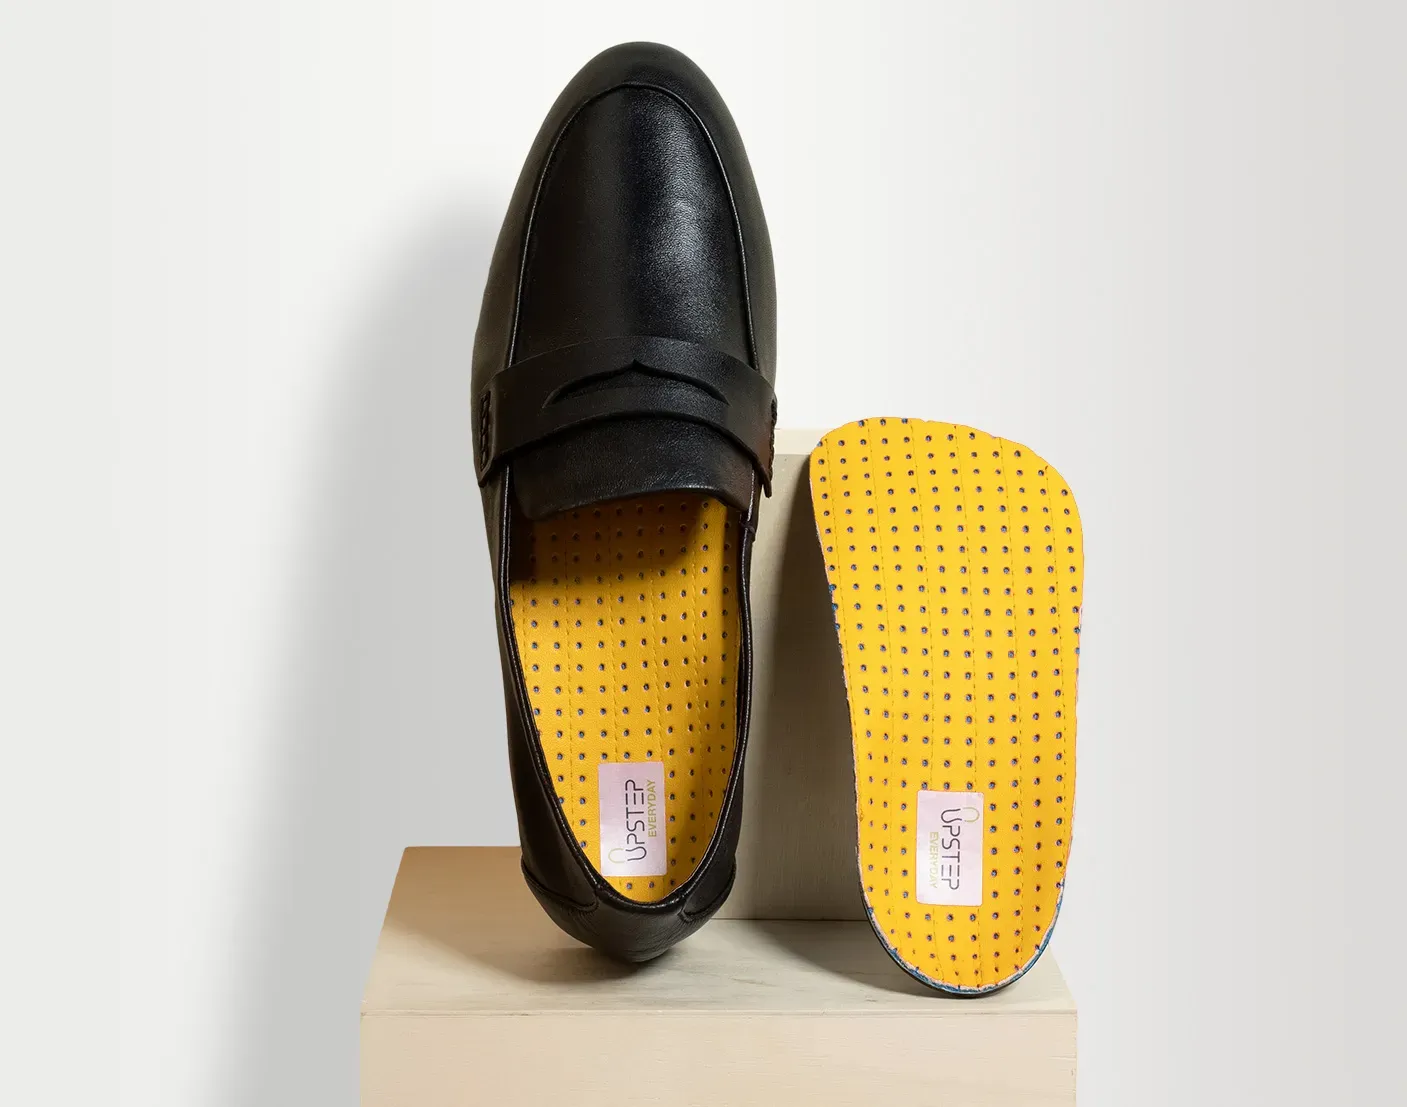 Yellow upstep custom orthotics for overpronation presented in a black formal shoe